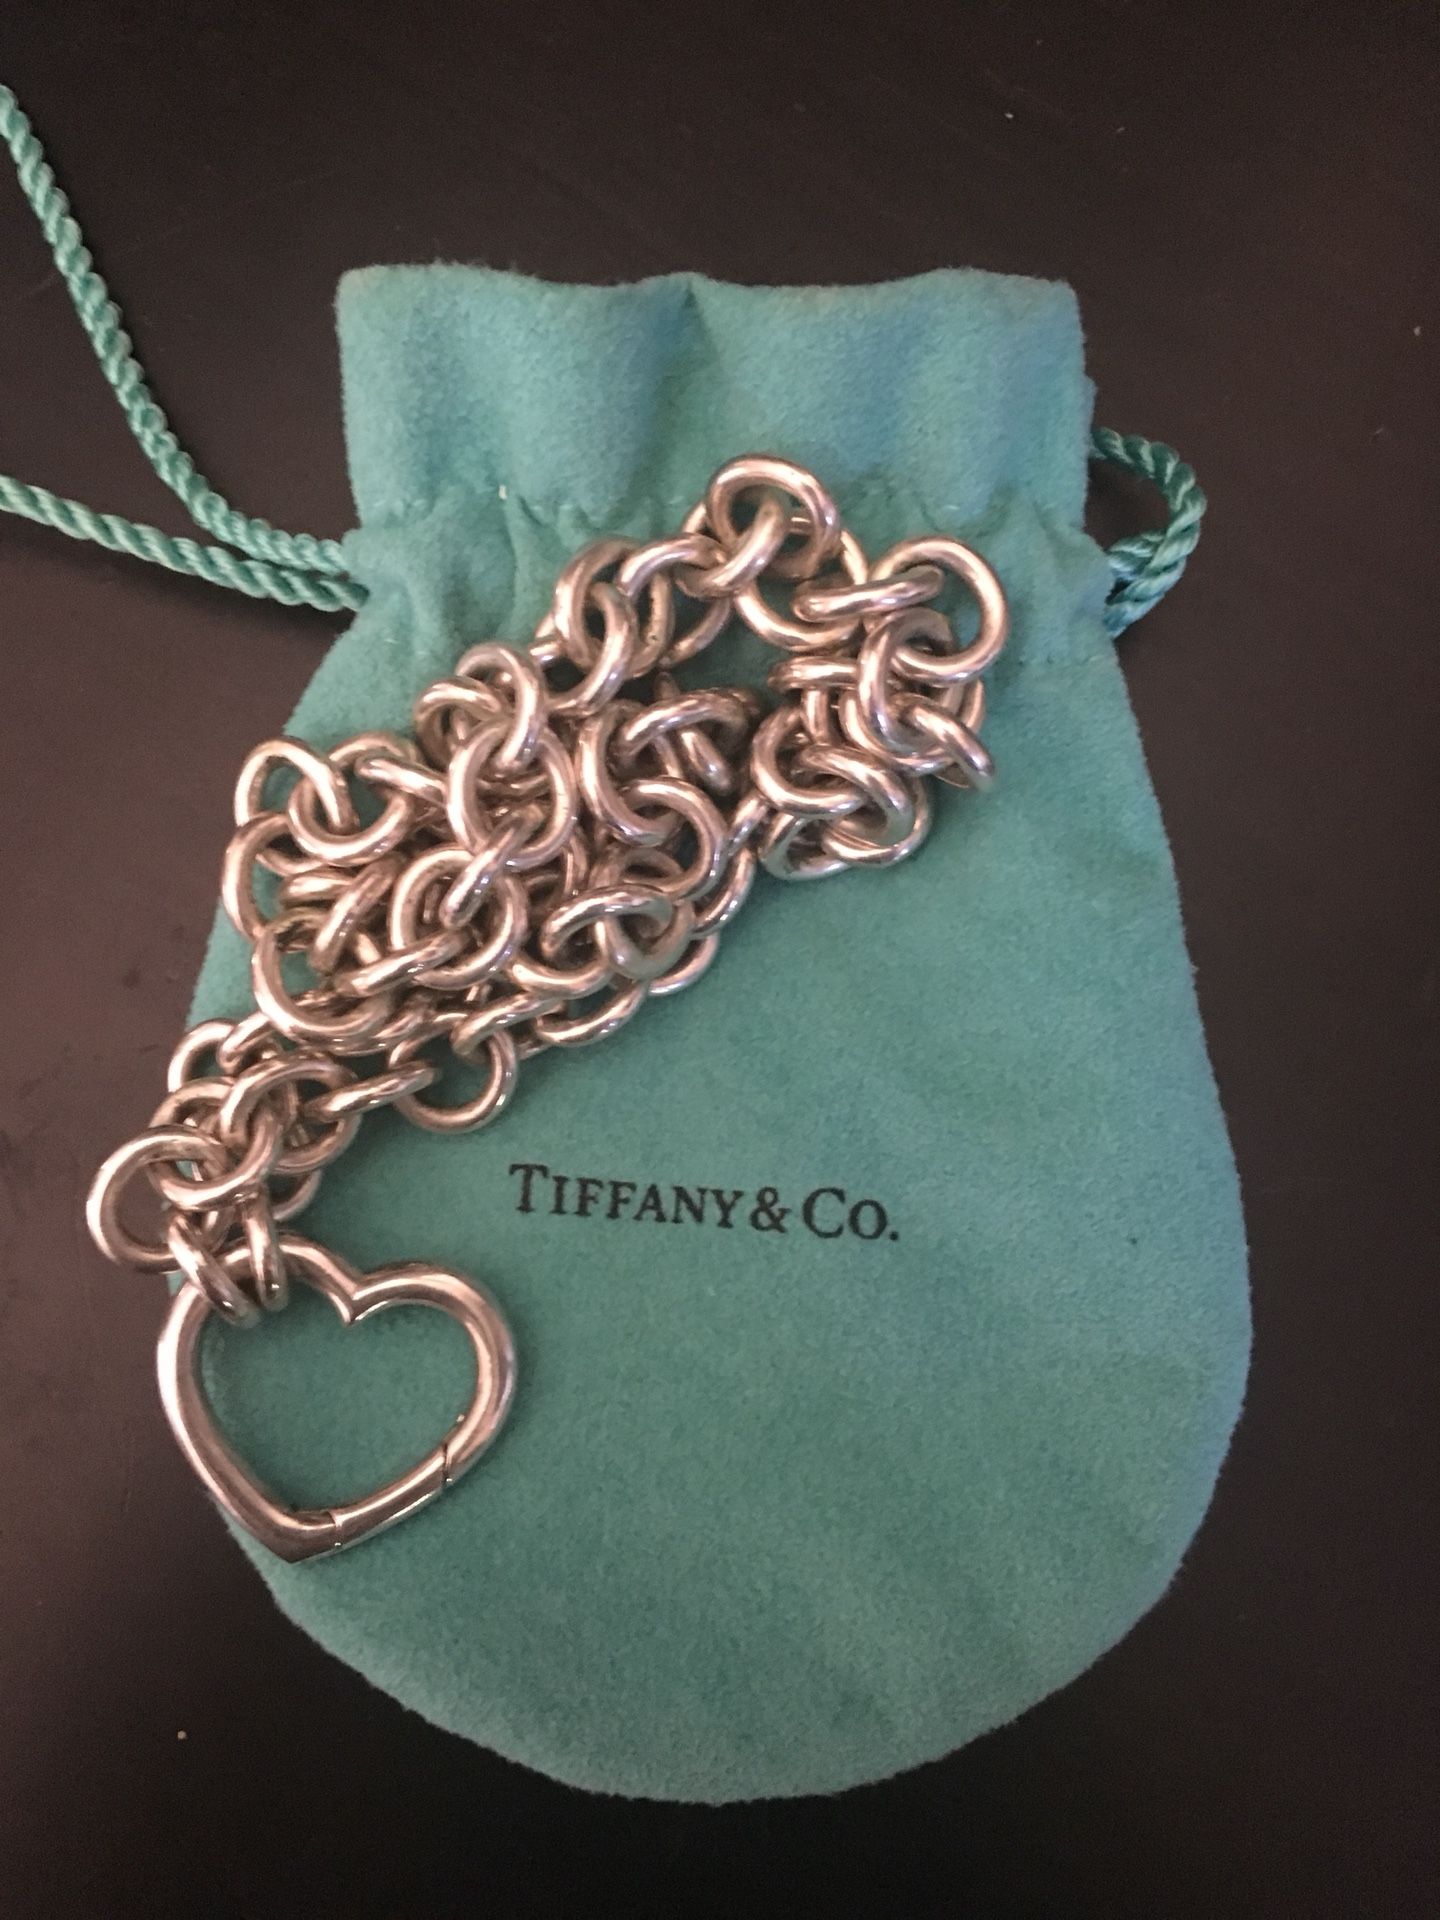 Rare and retired Tiffany necklace